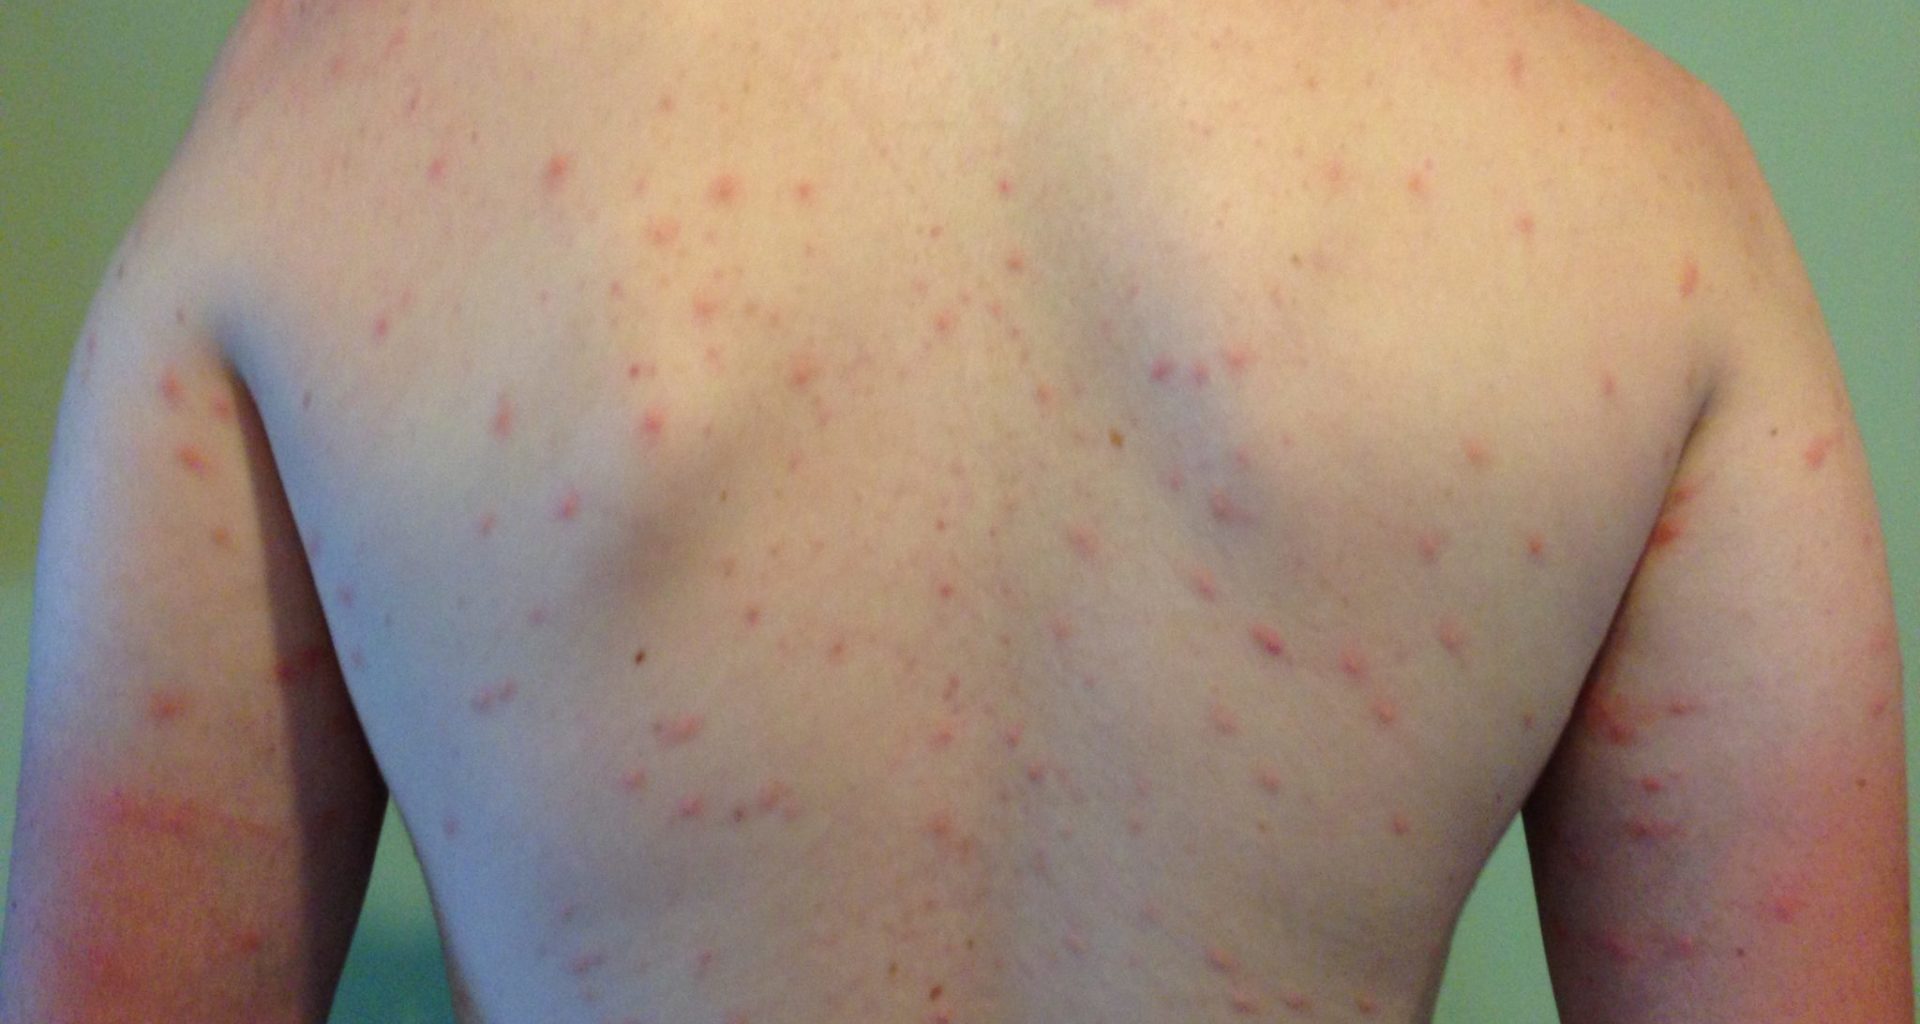 swimmers itch bumps